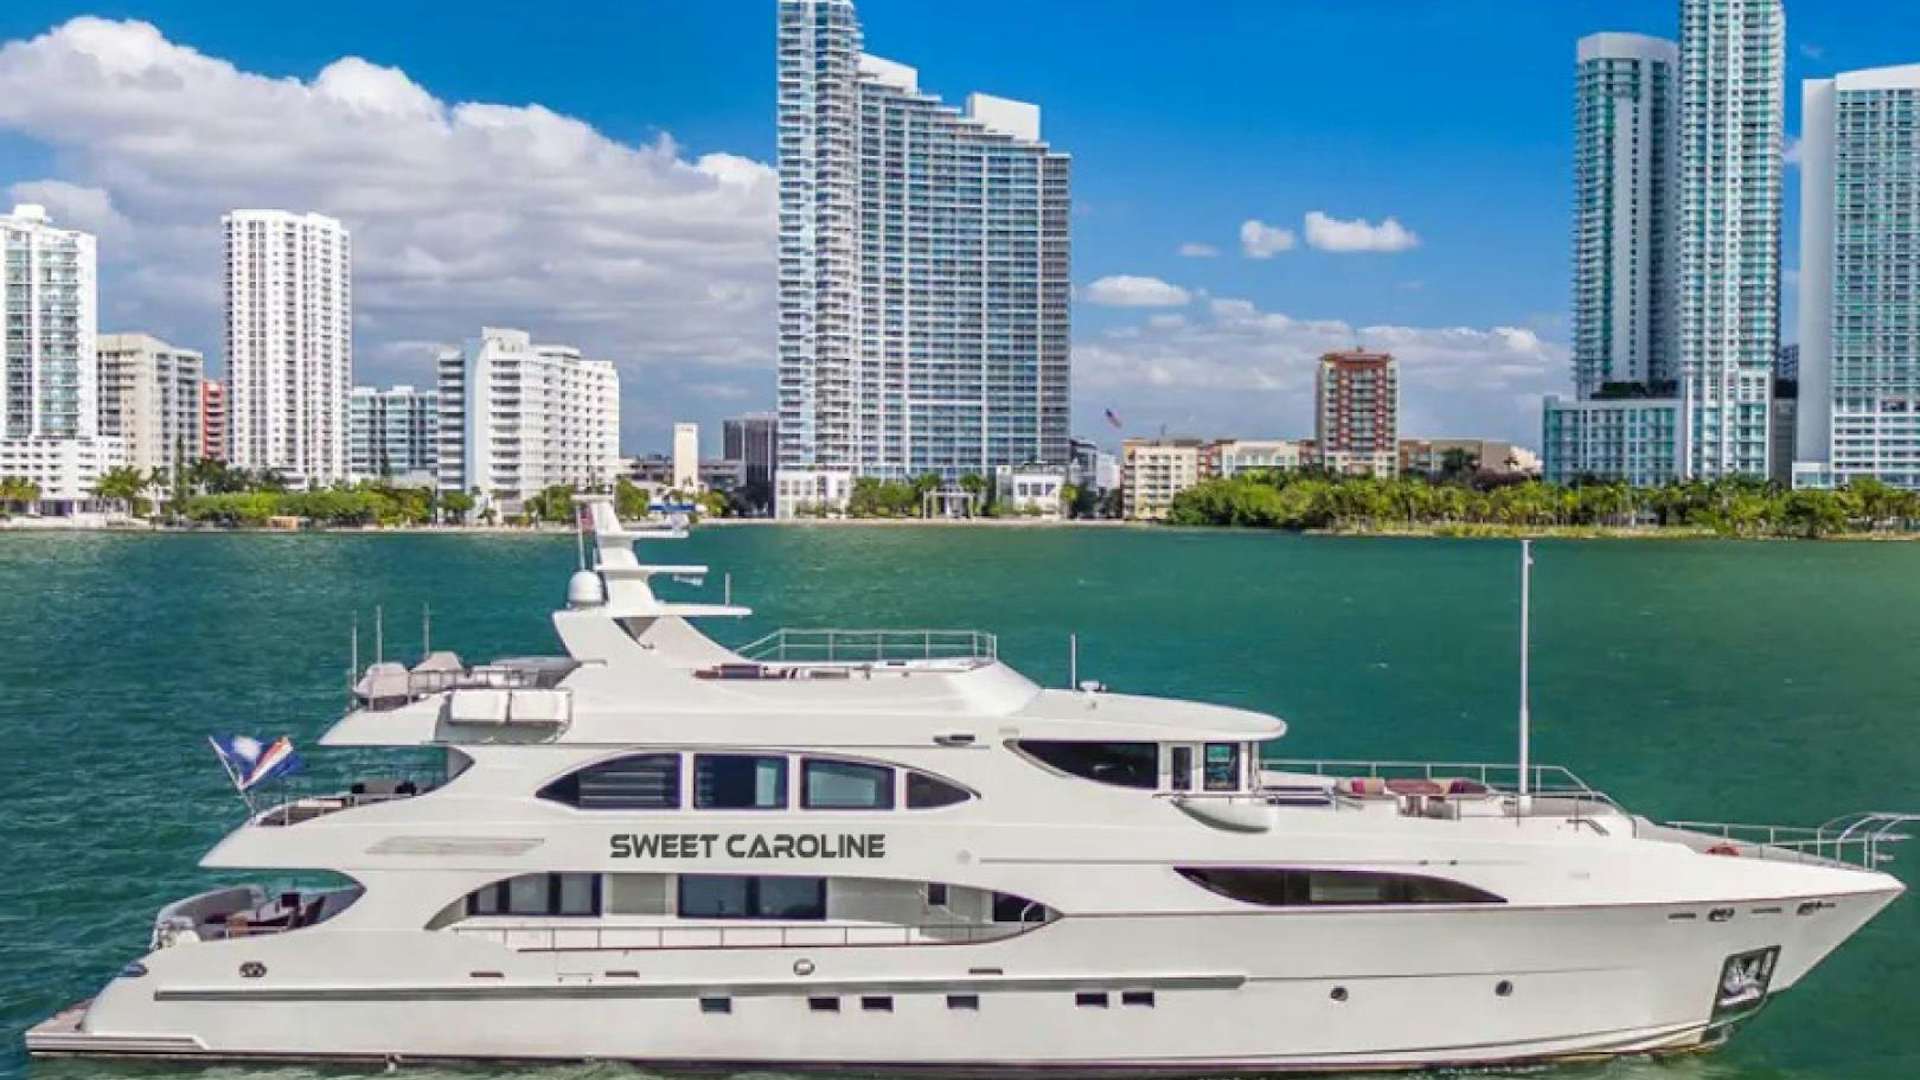 Watch Video for SWEET CAROLINE Yacht for Sale